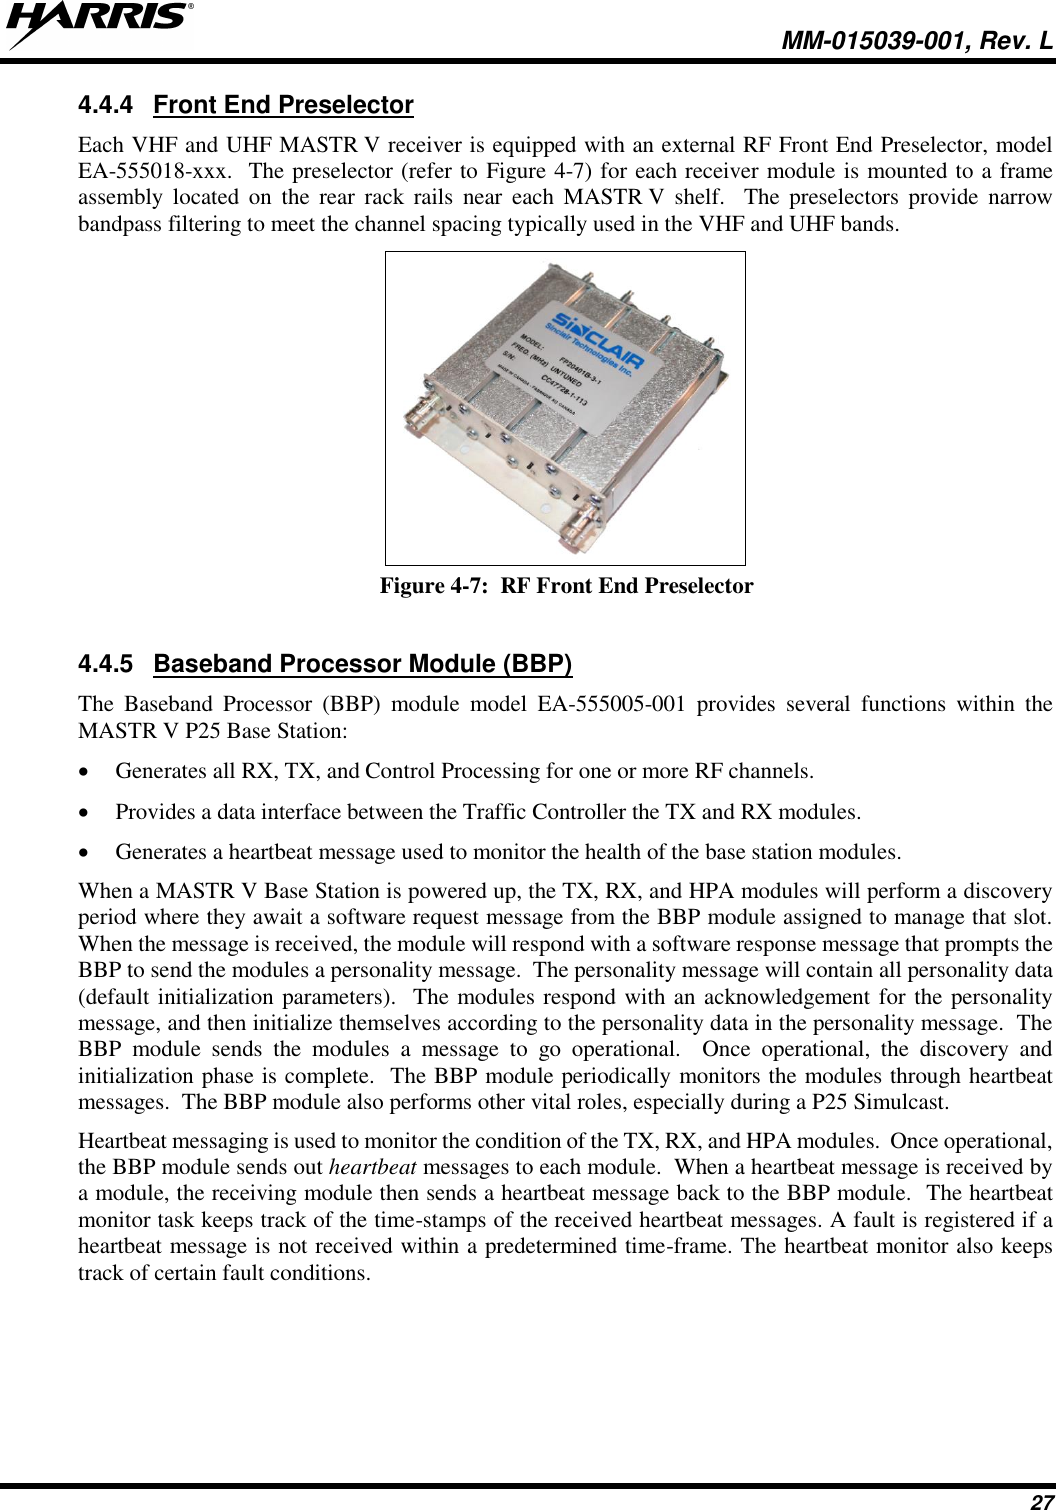   MM-015039-001, Rev. L 27 4.4.4  Front End Preselector Each VHF and UHF MASTR V receiver is equipped with an external RF Front End Preselector, model EA-555018-xxx.  The preselector (refer to Figure 4-7) for each receiver module is mounted to a frame assembly  located  on  the  rear  rack  rails  near  each  MASTR V  shelf.    The  preselectors  provide  narrow bandpass filtering to meet the channel spacing typically used in the VHF and UHF bands.  Figure 4-7:  RF Front End Preselector  4.4.5  Baseband Processor Module (BBP) The  Baseband  Processor  (BBP)  module  model  EA-555005-001  provides  several  functions  within  the MASTR V P25 Base Station: • Generates all RX, TX, and Control Processing for one or more RF channels. • Provides a data interface between the Traffic Controller the TX and RX modules. • Generates a heartbeat message used to monitor the health of the base station modules. When a MASTR V Base Station is powered up, the TX, RX, and HPA modules will perform a discovery period where they await a software request message from the BBP module assigned to manage that slot.  When the message is received, the module will respond with a software response message that prompts the BBP to send the modules a personality message.  The personality message will contain all personality data (default initialization parameters).  The modules respond with an acknowledgement for the personality message, and then initialize themselves according to the personality data in the personality message.  The BBP  module  sends  the  modules  a  message  to  go  operational.    Once  operational,  the  discovery  and initialization phase is complete.  The BBP module periodically monitors the modules through heartbeat messages.  The BBP module also performs other vital roles, especially during a P25 Simulcast. Heartbeat messaging is used to monitor the condition of the TX, RX, and HPA modules.  Once operational, the BBP module sends out heartbeat messages to each module.  When a heartbeat message is received by a module, the receiving module then sends a heartbeat message back to the BBP module.  The heartbeat monitor task keeps track of the time-stamps of the received heartbeat messages. A fault is registered if a heartbeat message is not received within a predetermined time-frame. The heartbeat monitor also keeps track of certain fault conditions. 